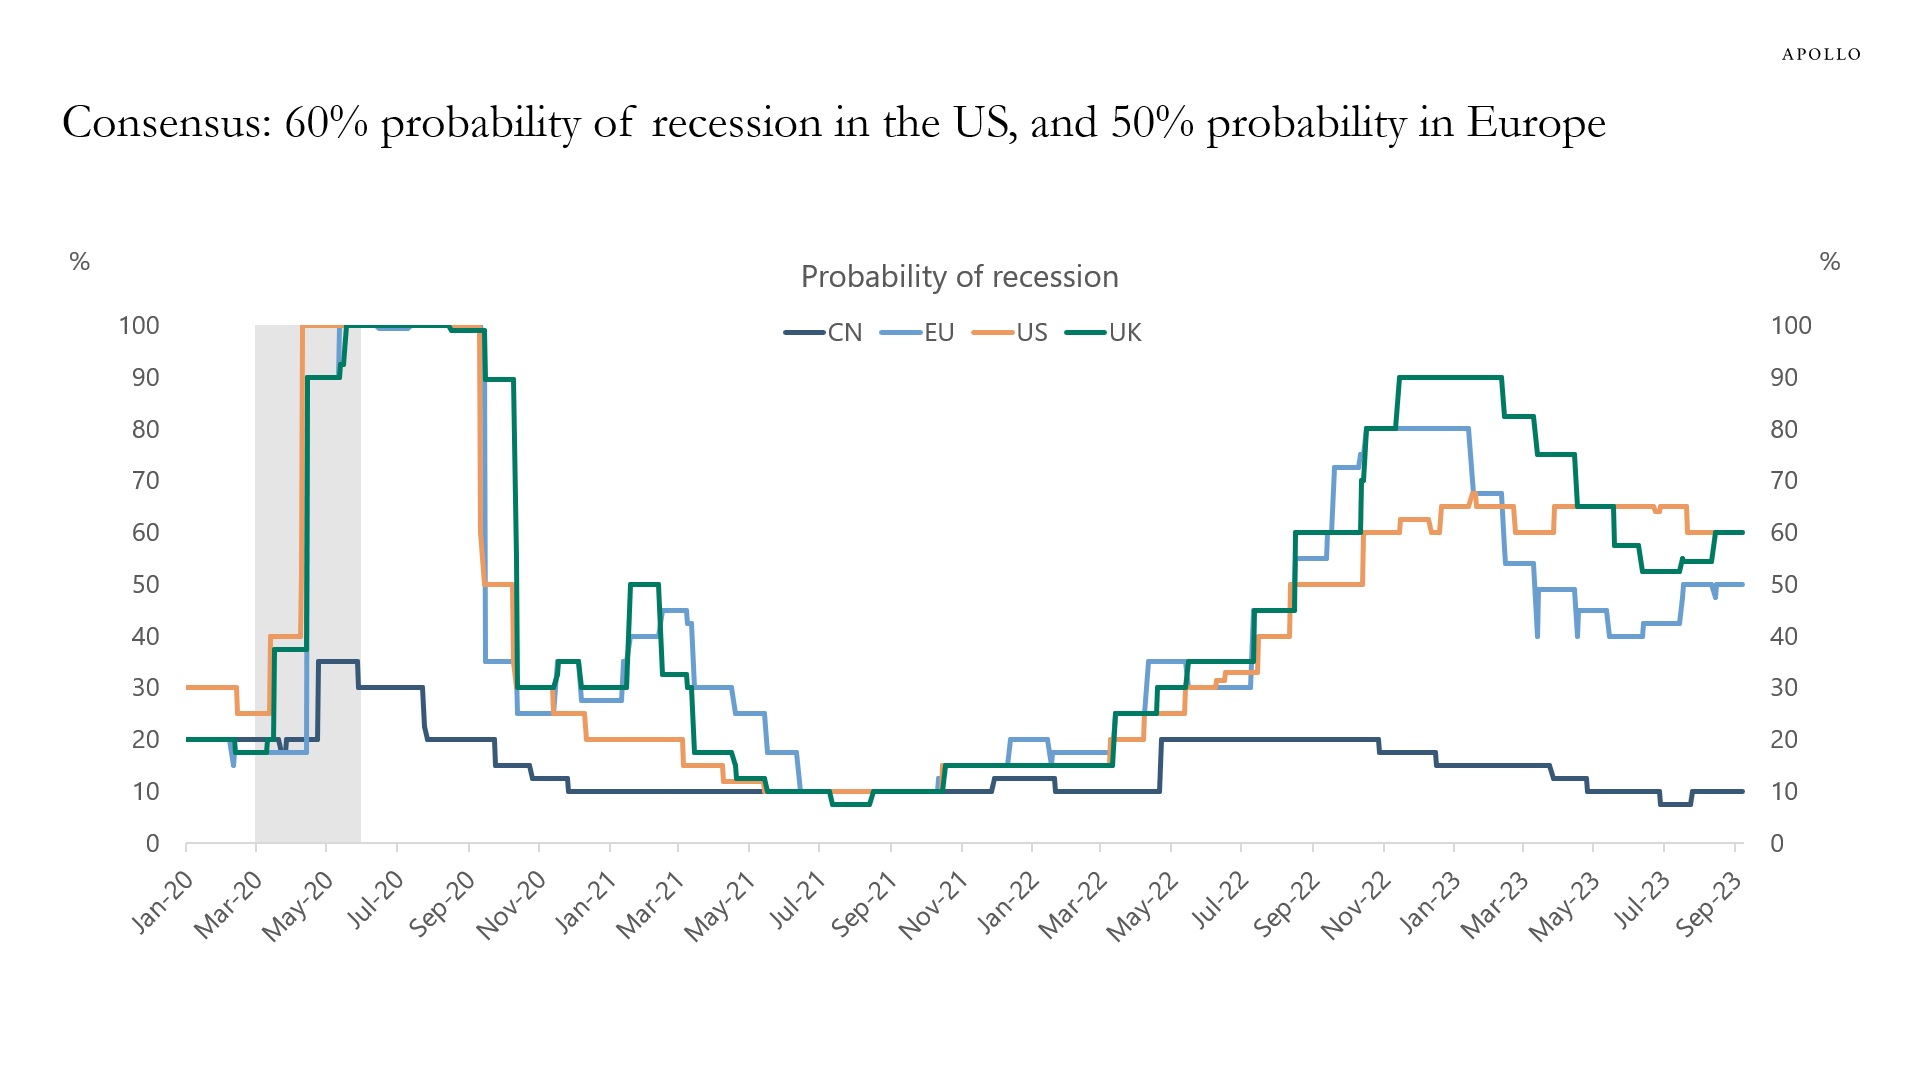 US has a high probability of recession